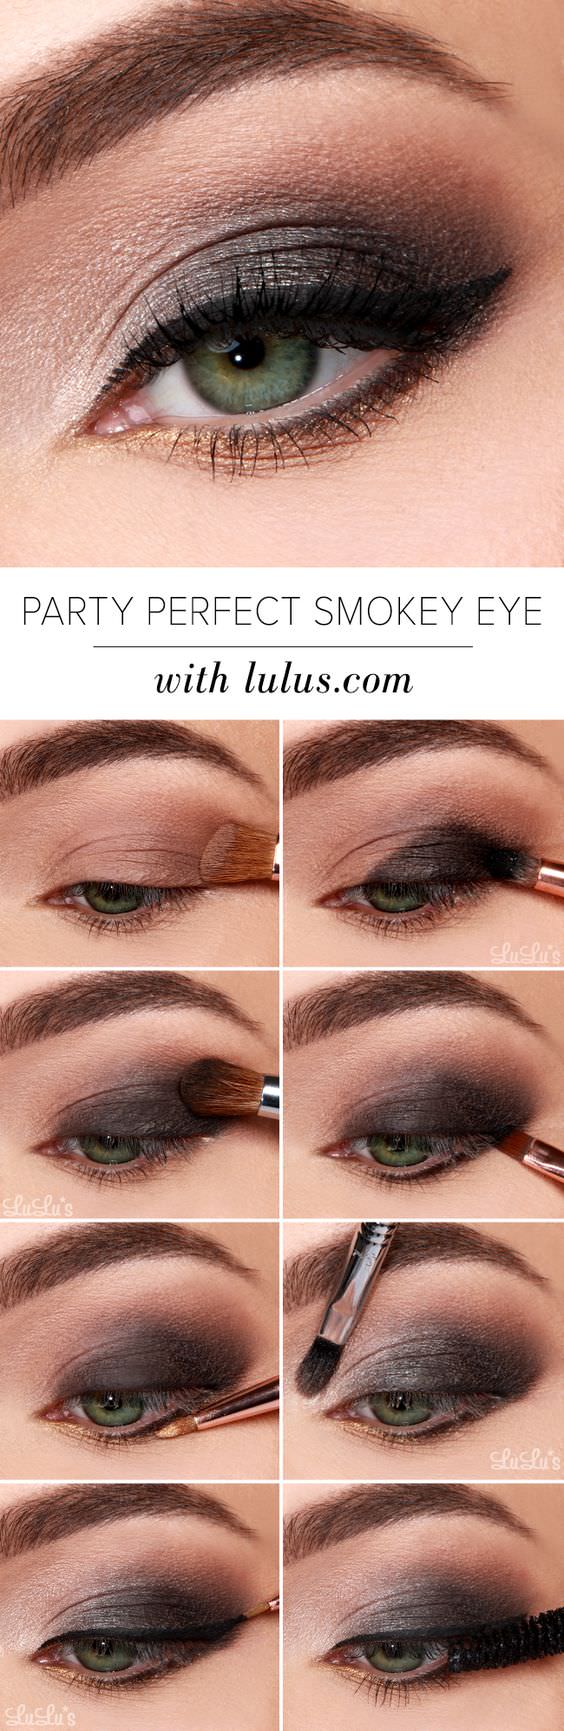 Wees kaart auditie 15 Step By Step Smokey Eye Makeup Tutorials for Beginners - Fashion Daily